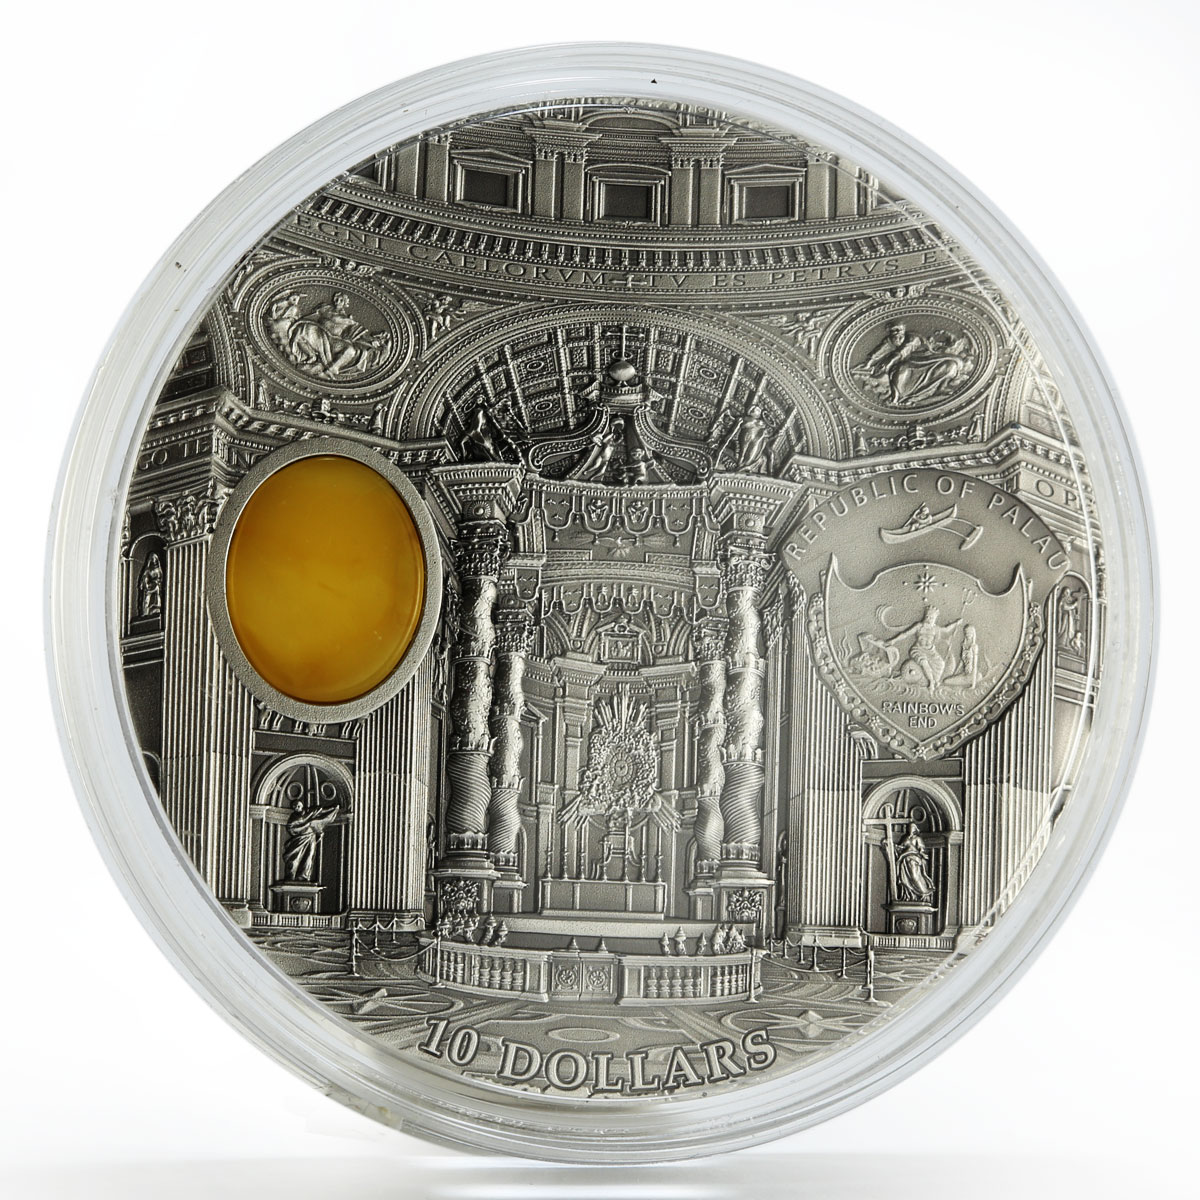 Palau 10 dollars St. Peter Basilica Rome with amber silver coin 2013